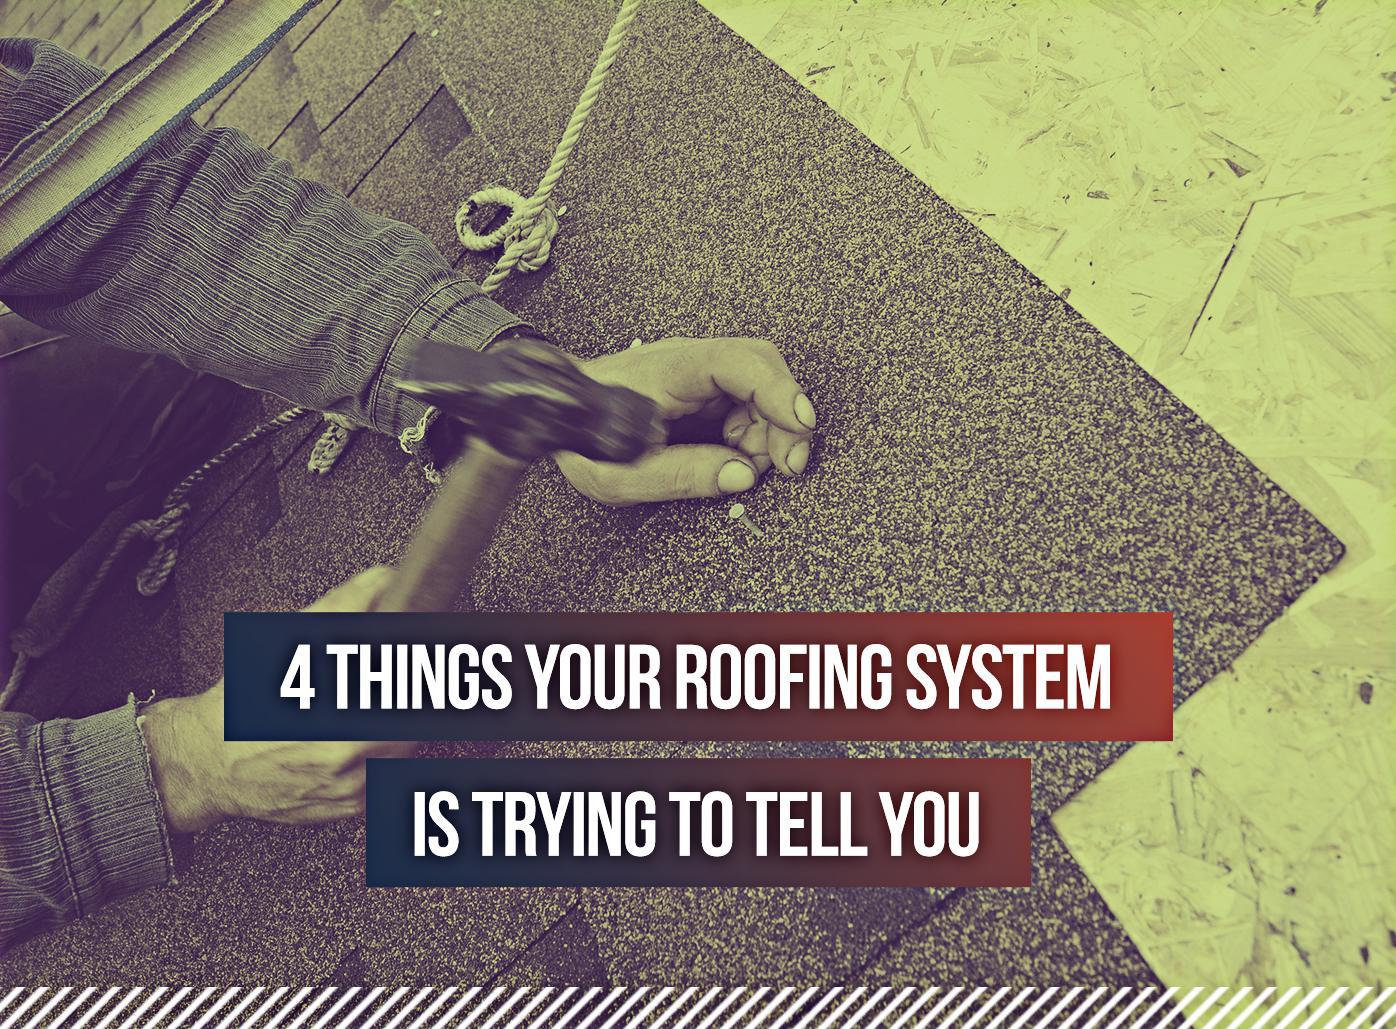 4 things your roofing system is trying to tell you